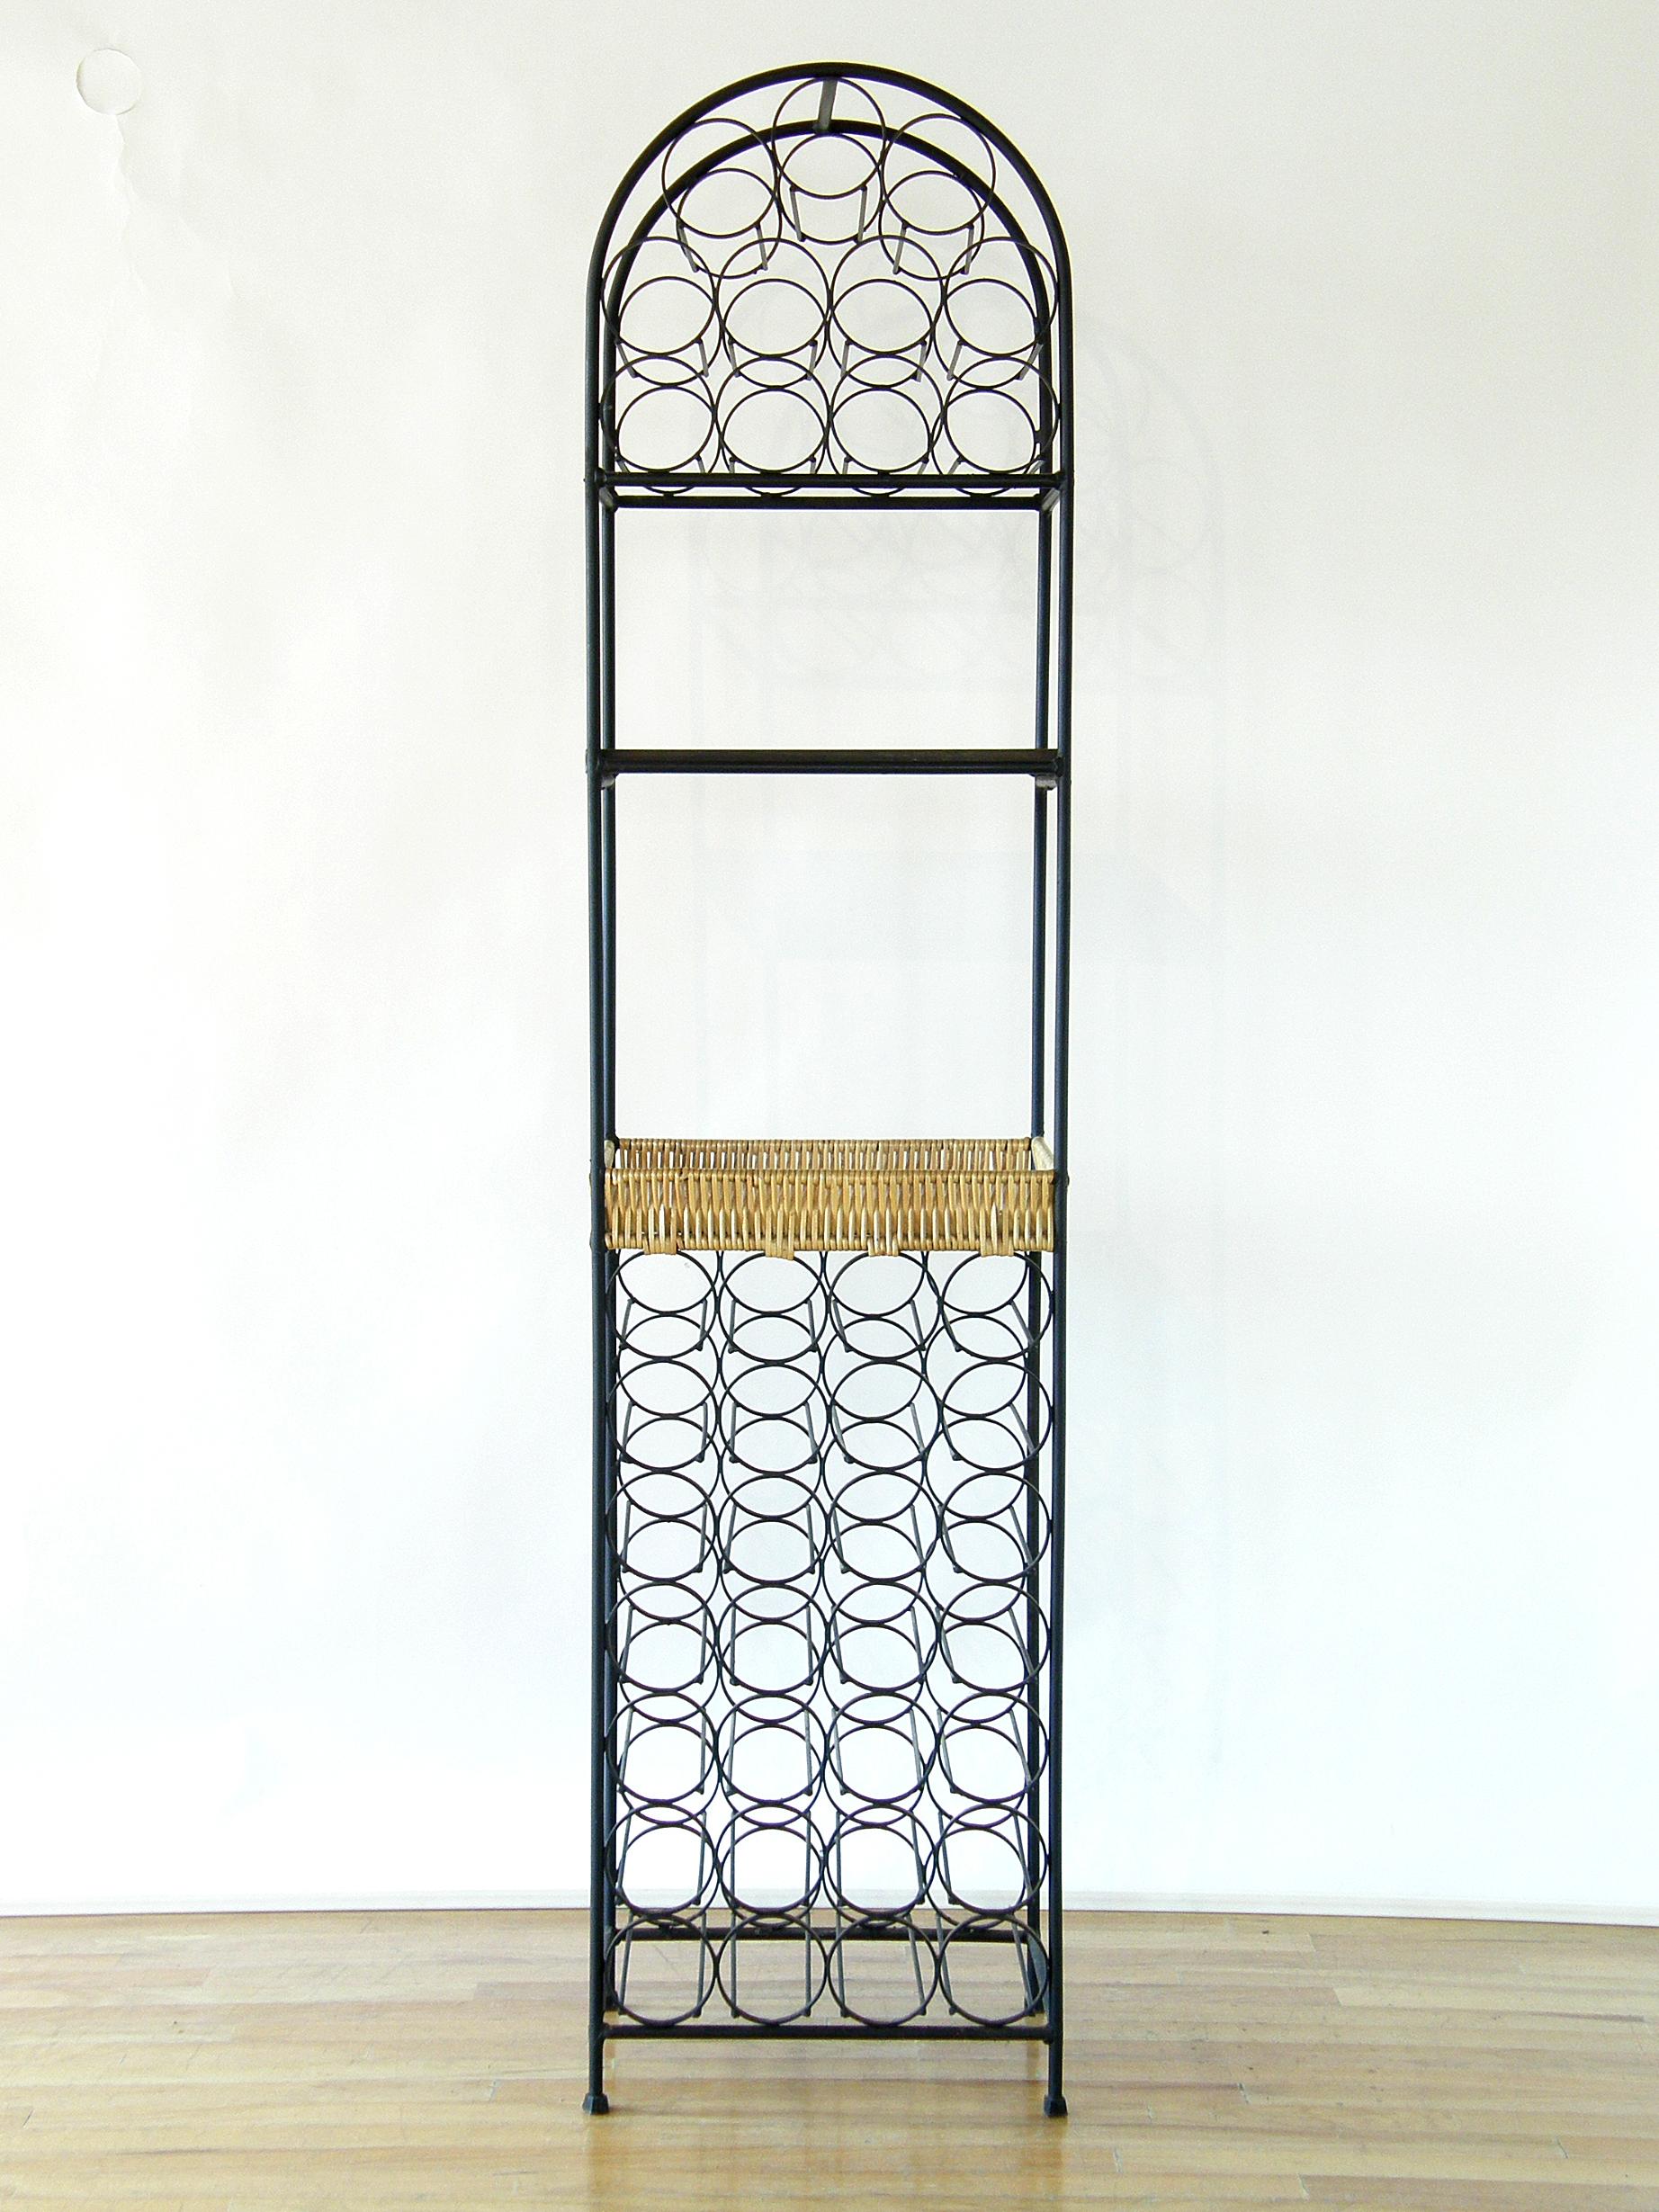 This compact wine rack with cocktail bar/serving area was designed by Arthur Umanoff for Shaver Howard. The design provides a large amount of bottle storage with a very small footprint, and the two laminated shelves offer a little area for mixing